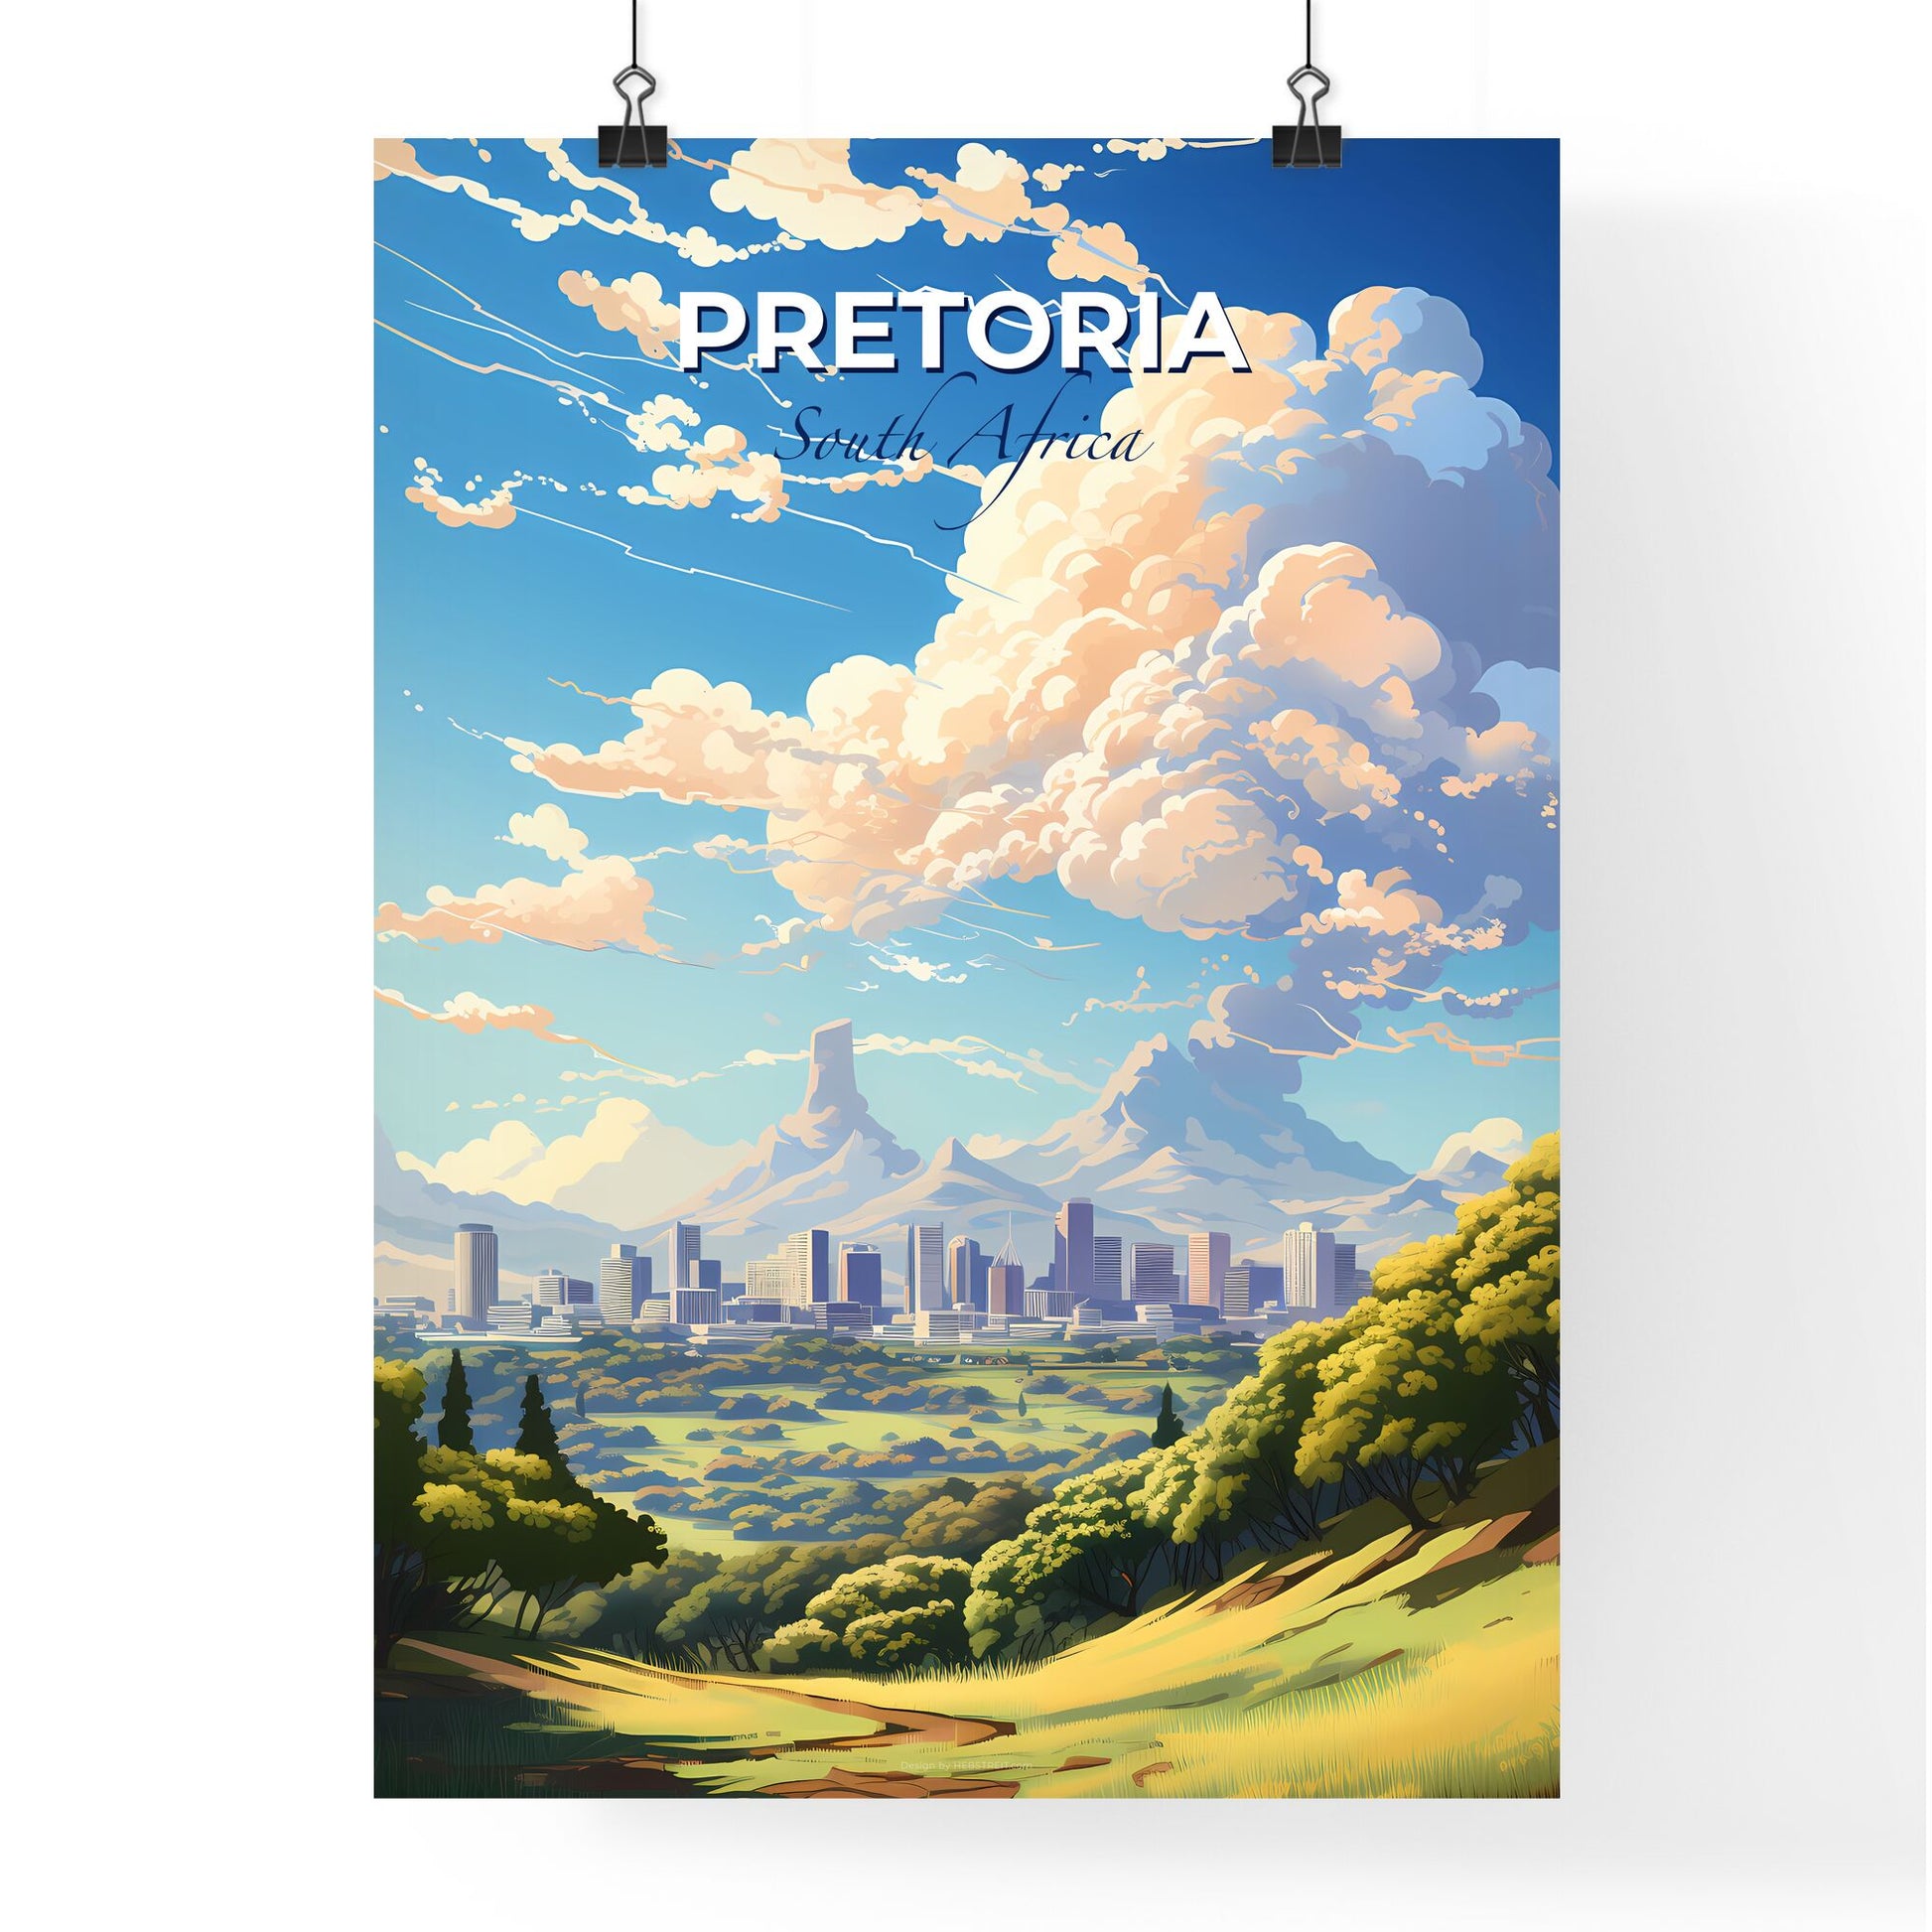 Pretoria South Africa Skyline - A Landscape With A City And Mountains - Customizable Travel Gift